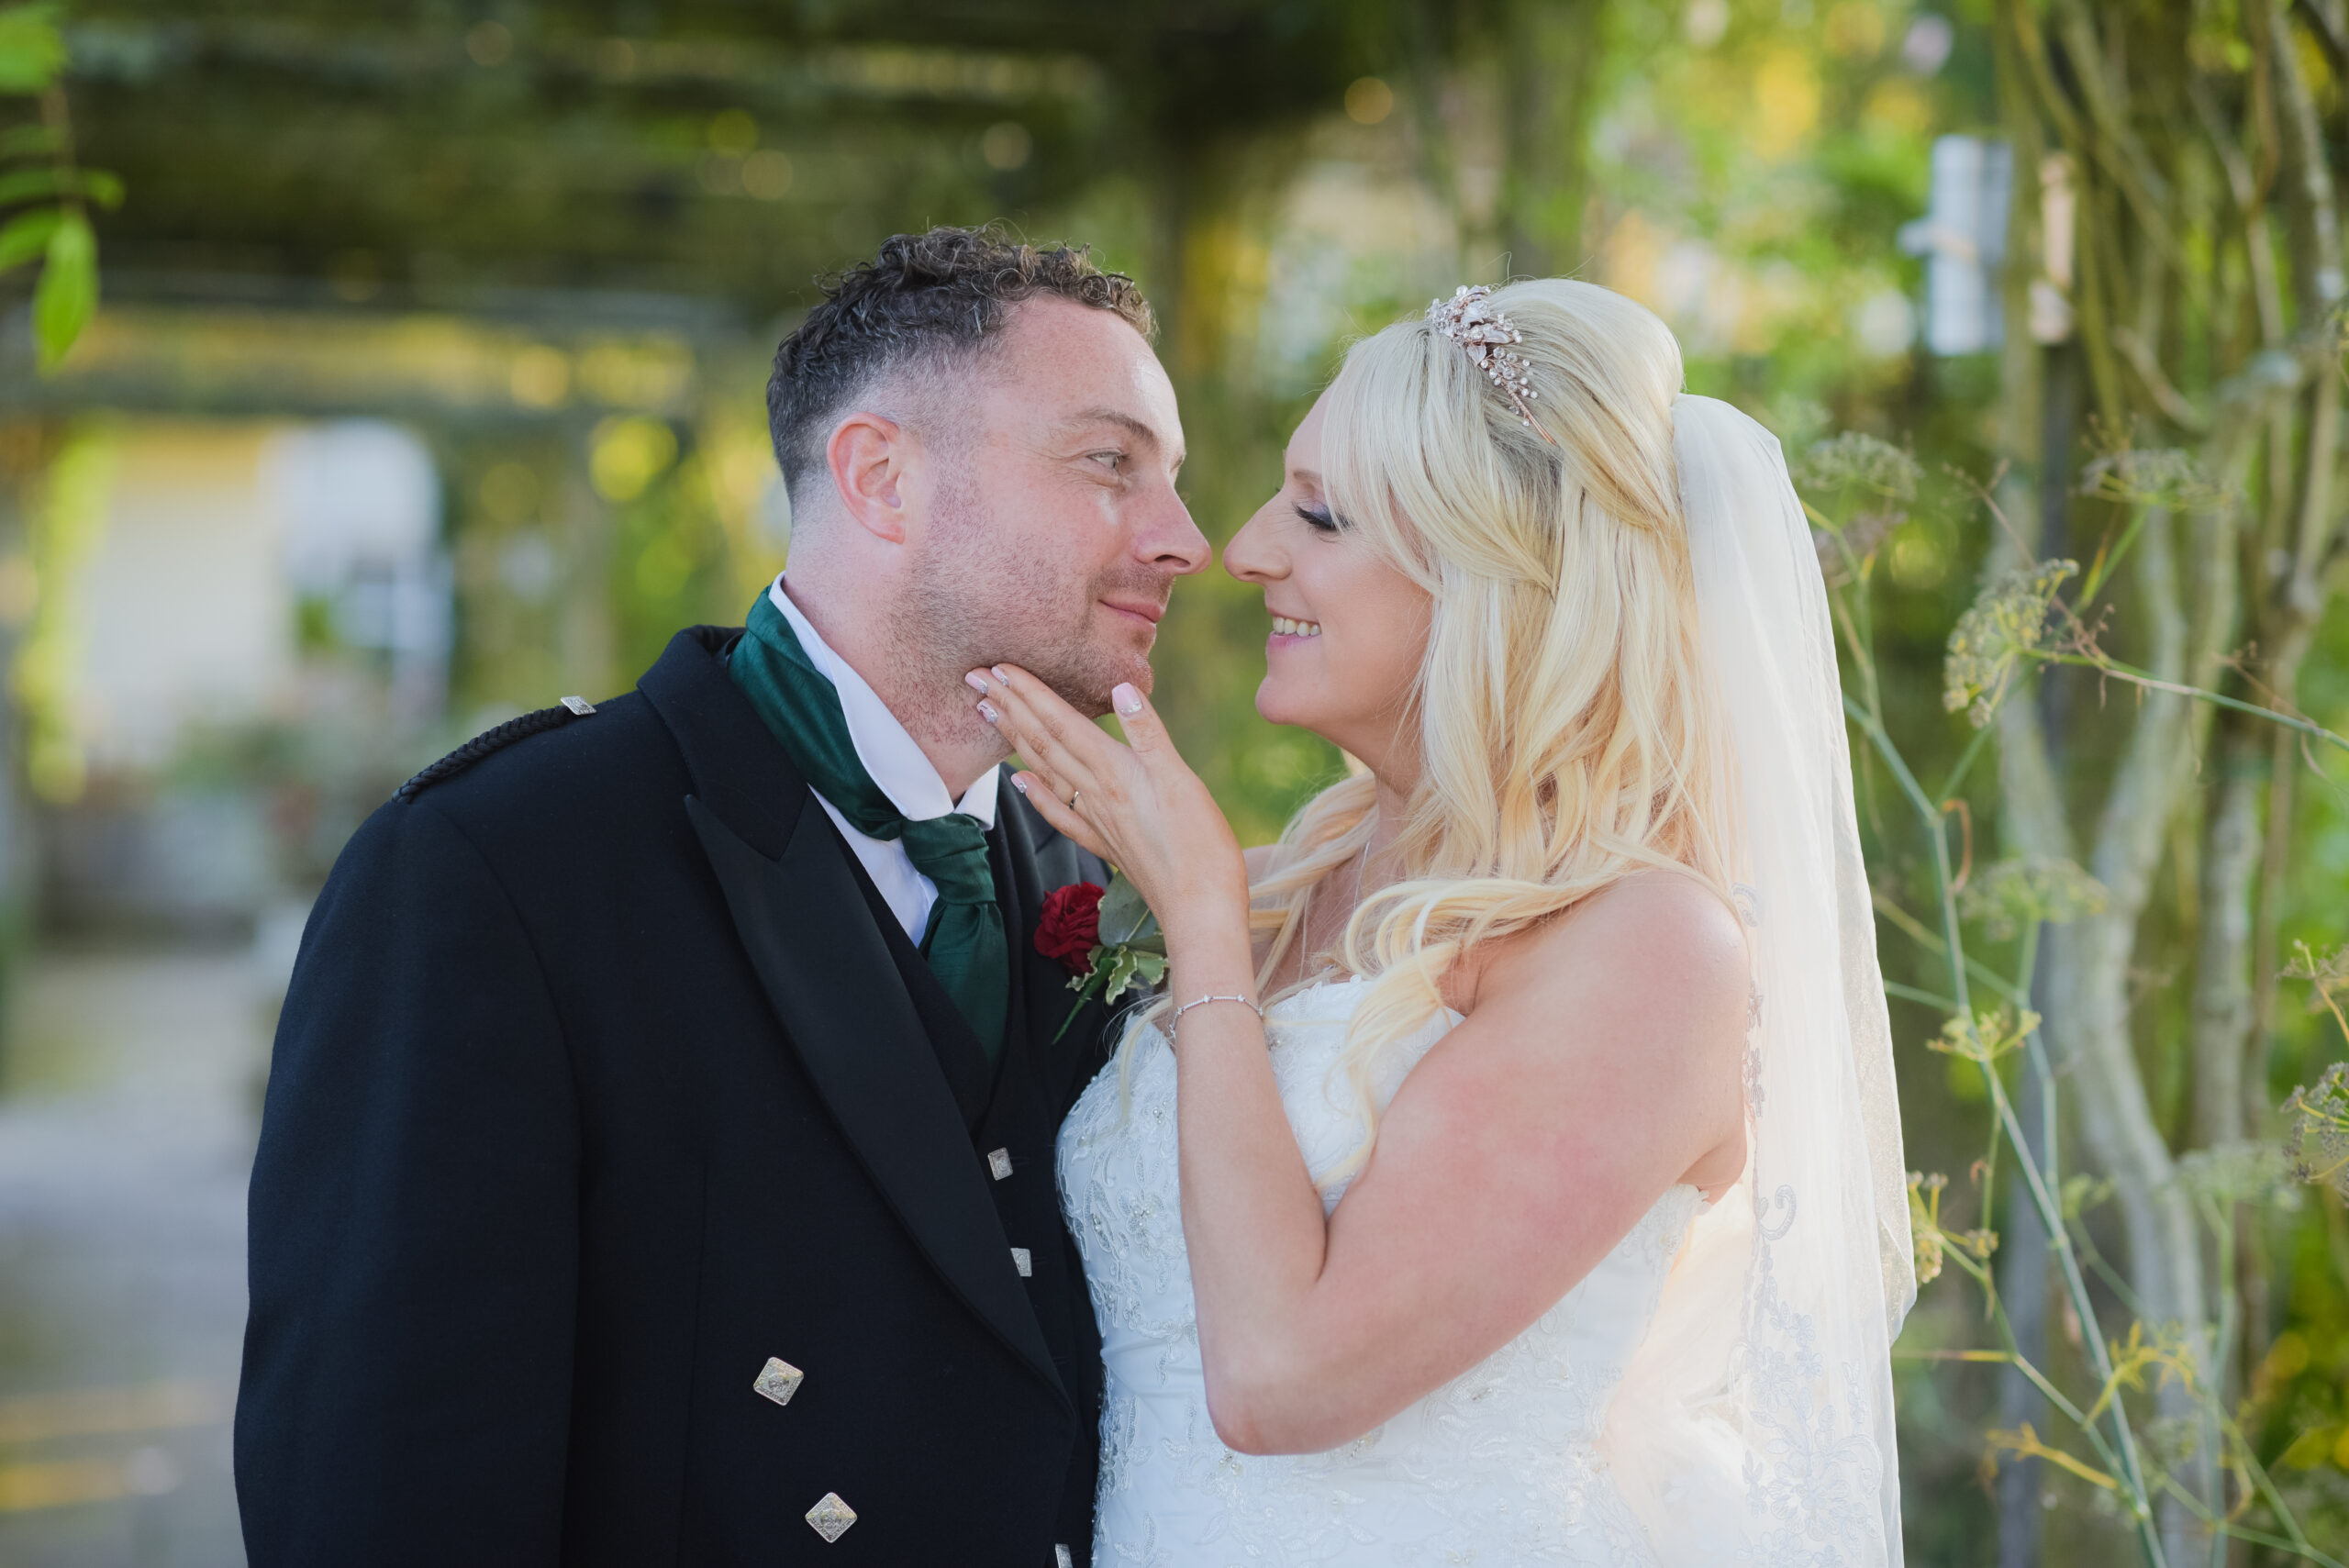 Beautiful Wedding Photography at Park House Hotel & Spa